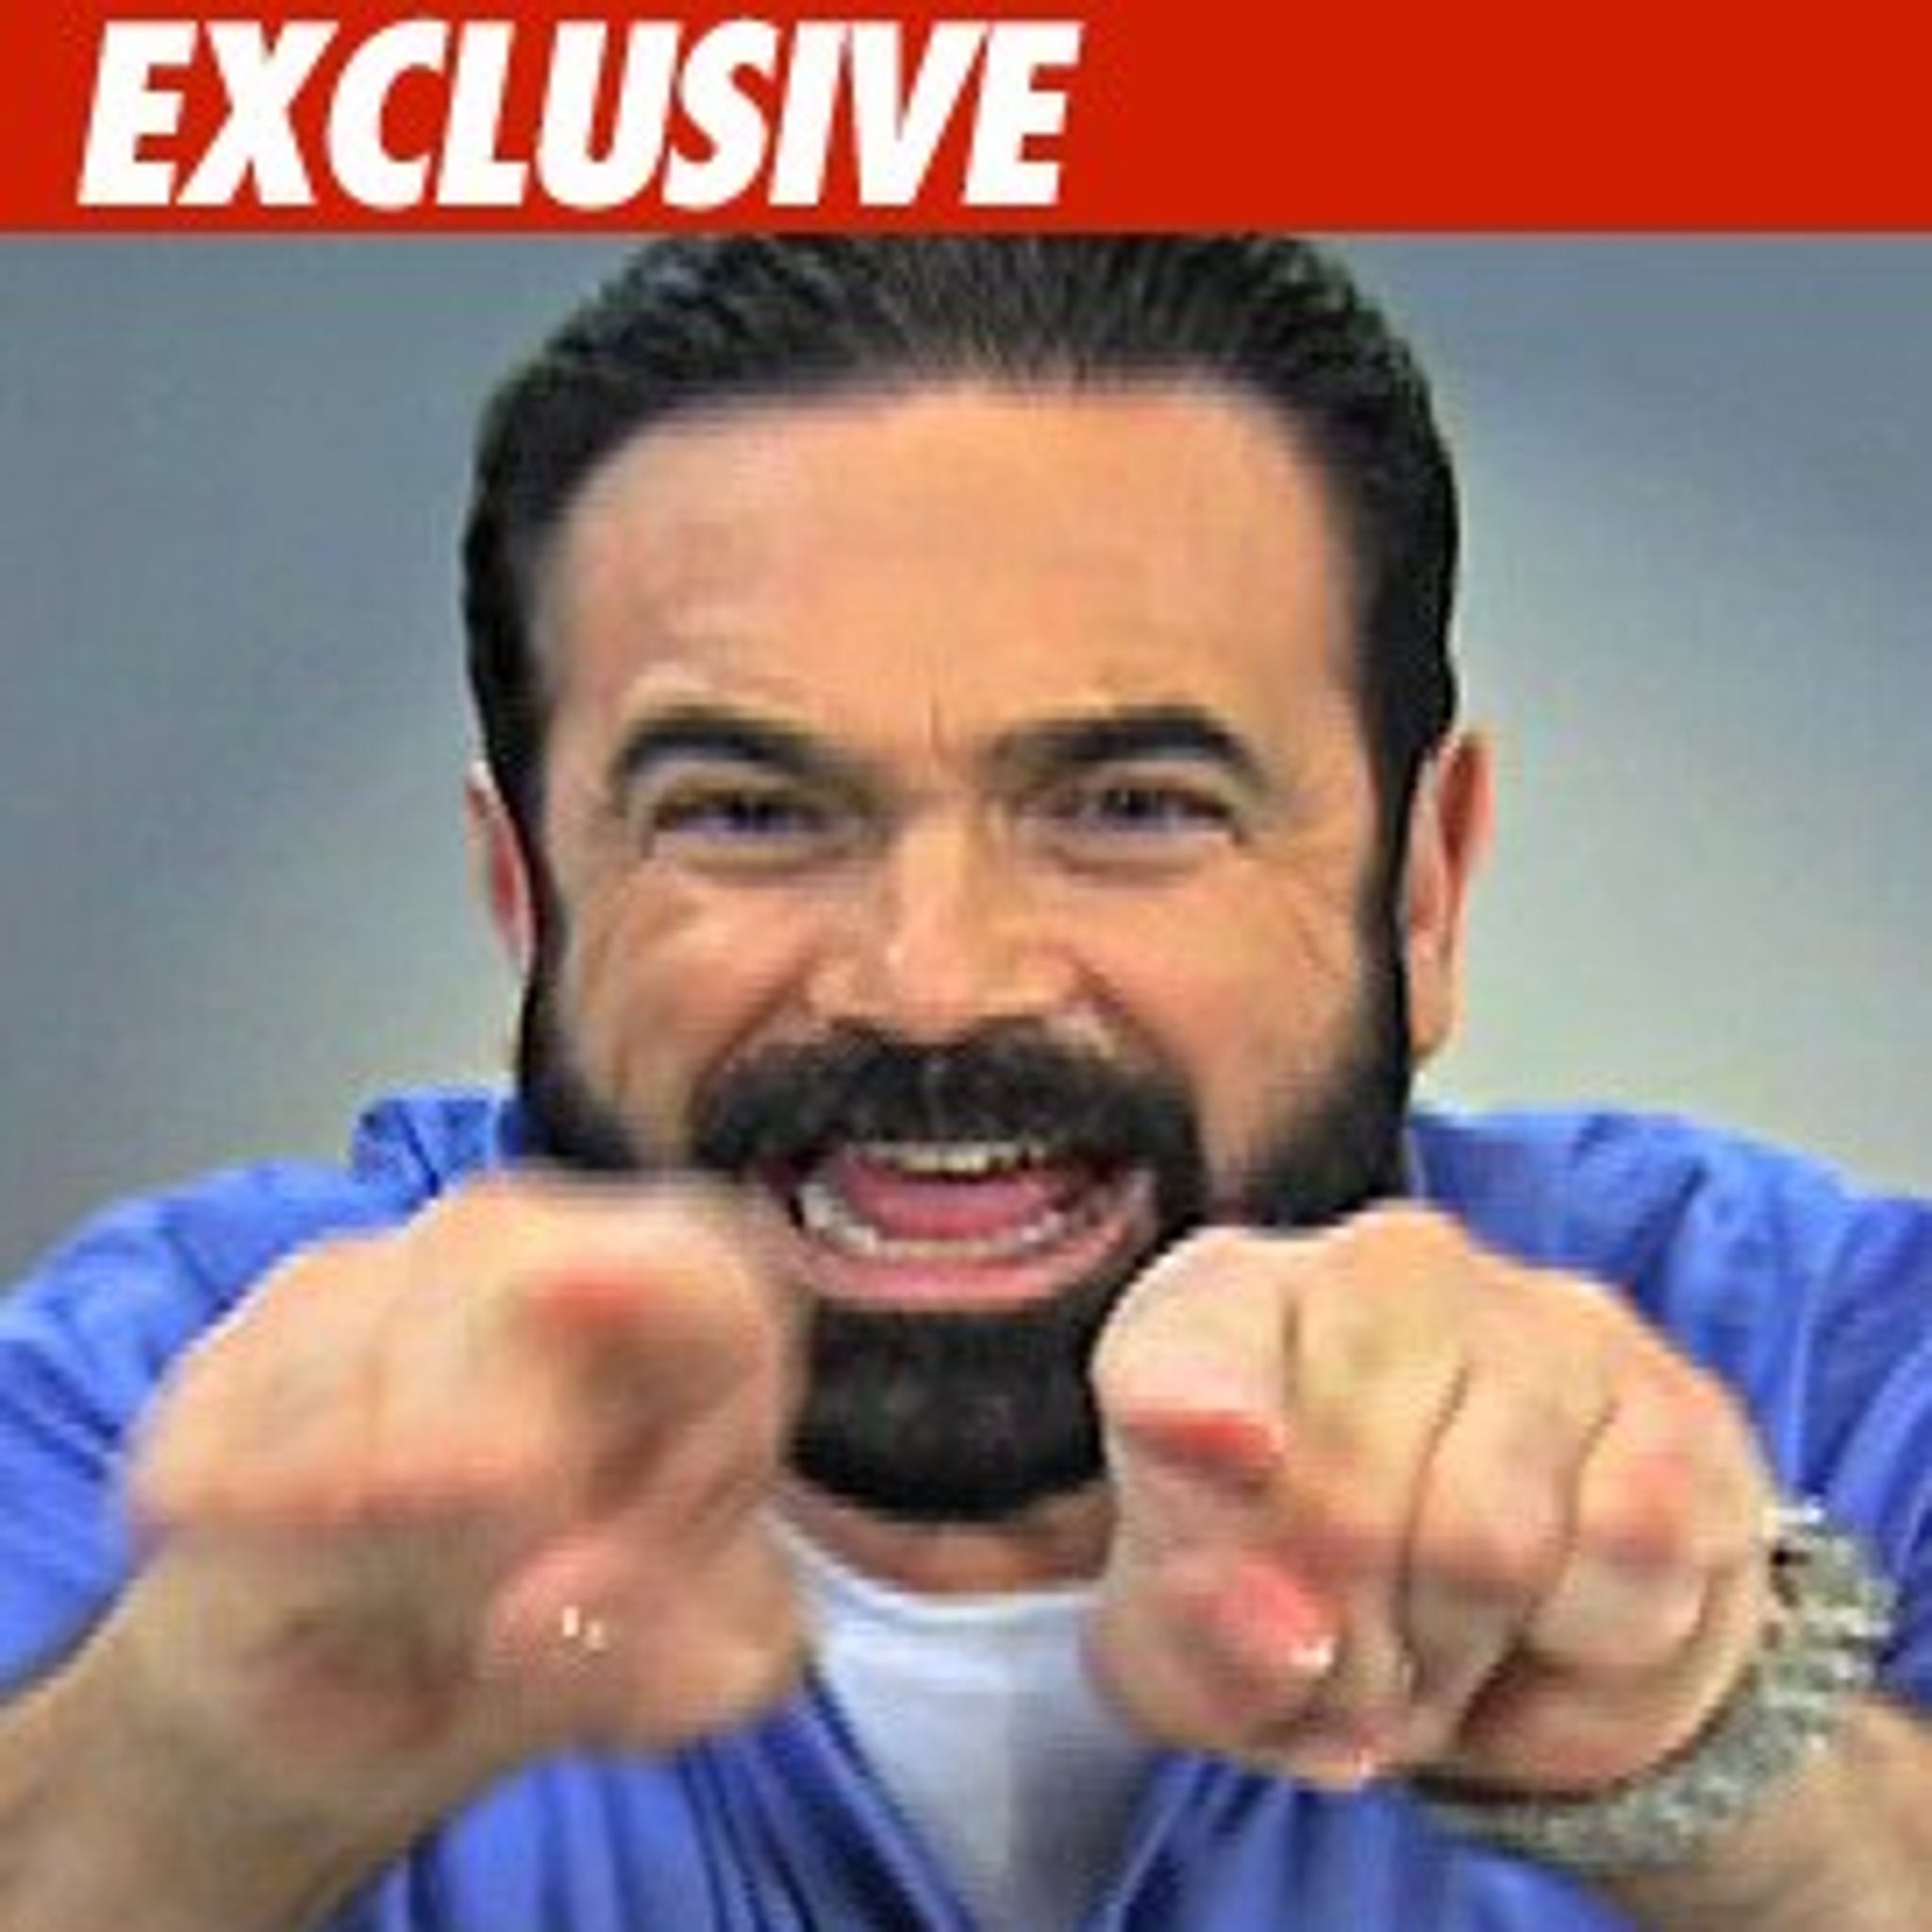 YARN, - hi. billy mays here for mighty mend-it